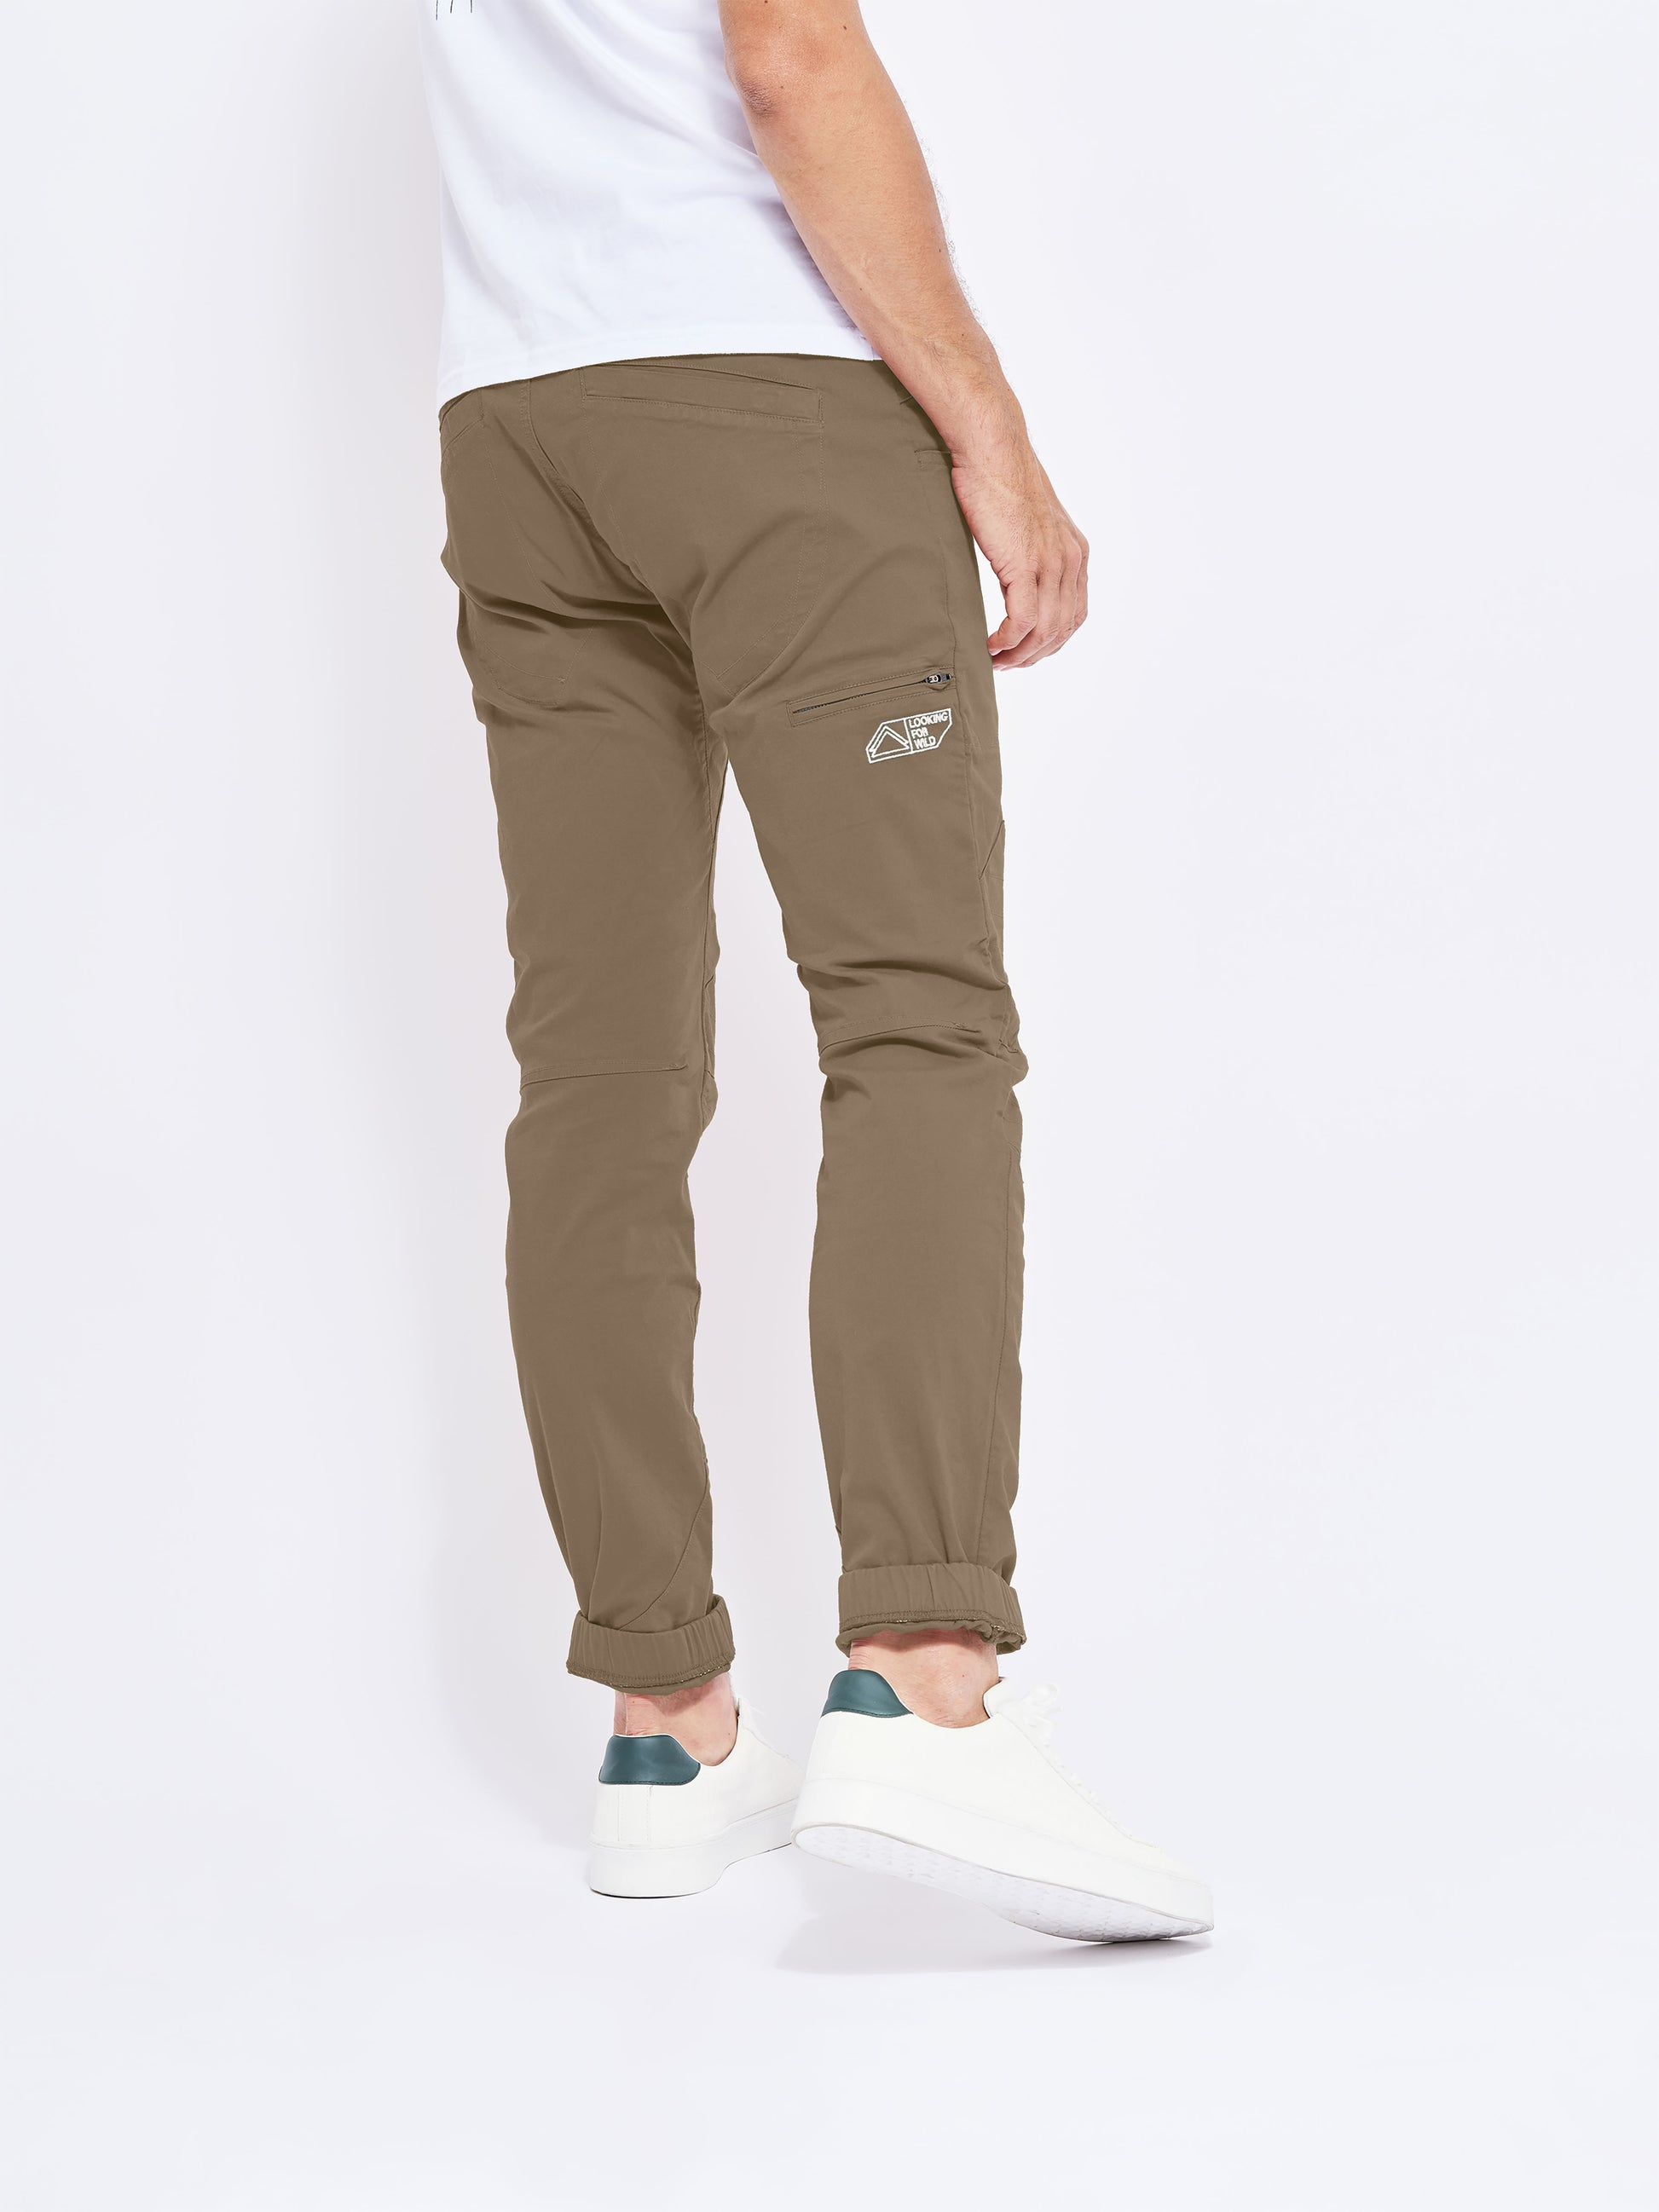 *New* Men's Fitz Roy Sepia Tint Trousers Summer 2024